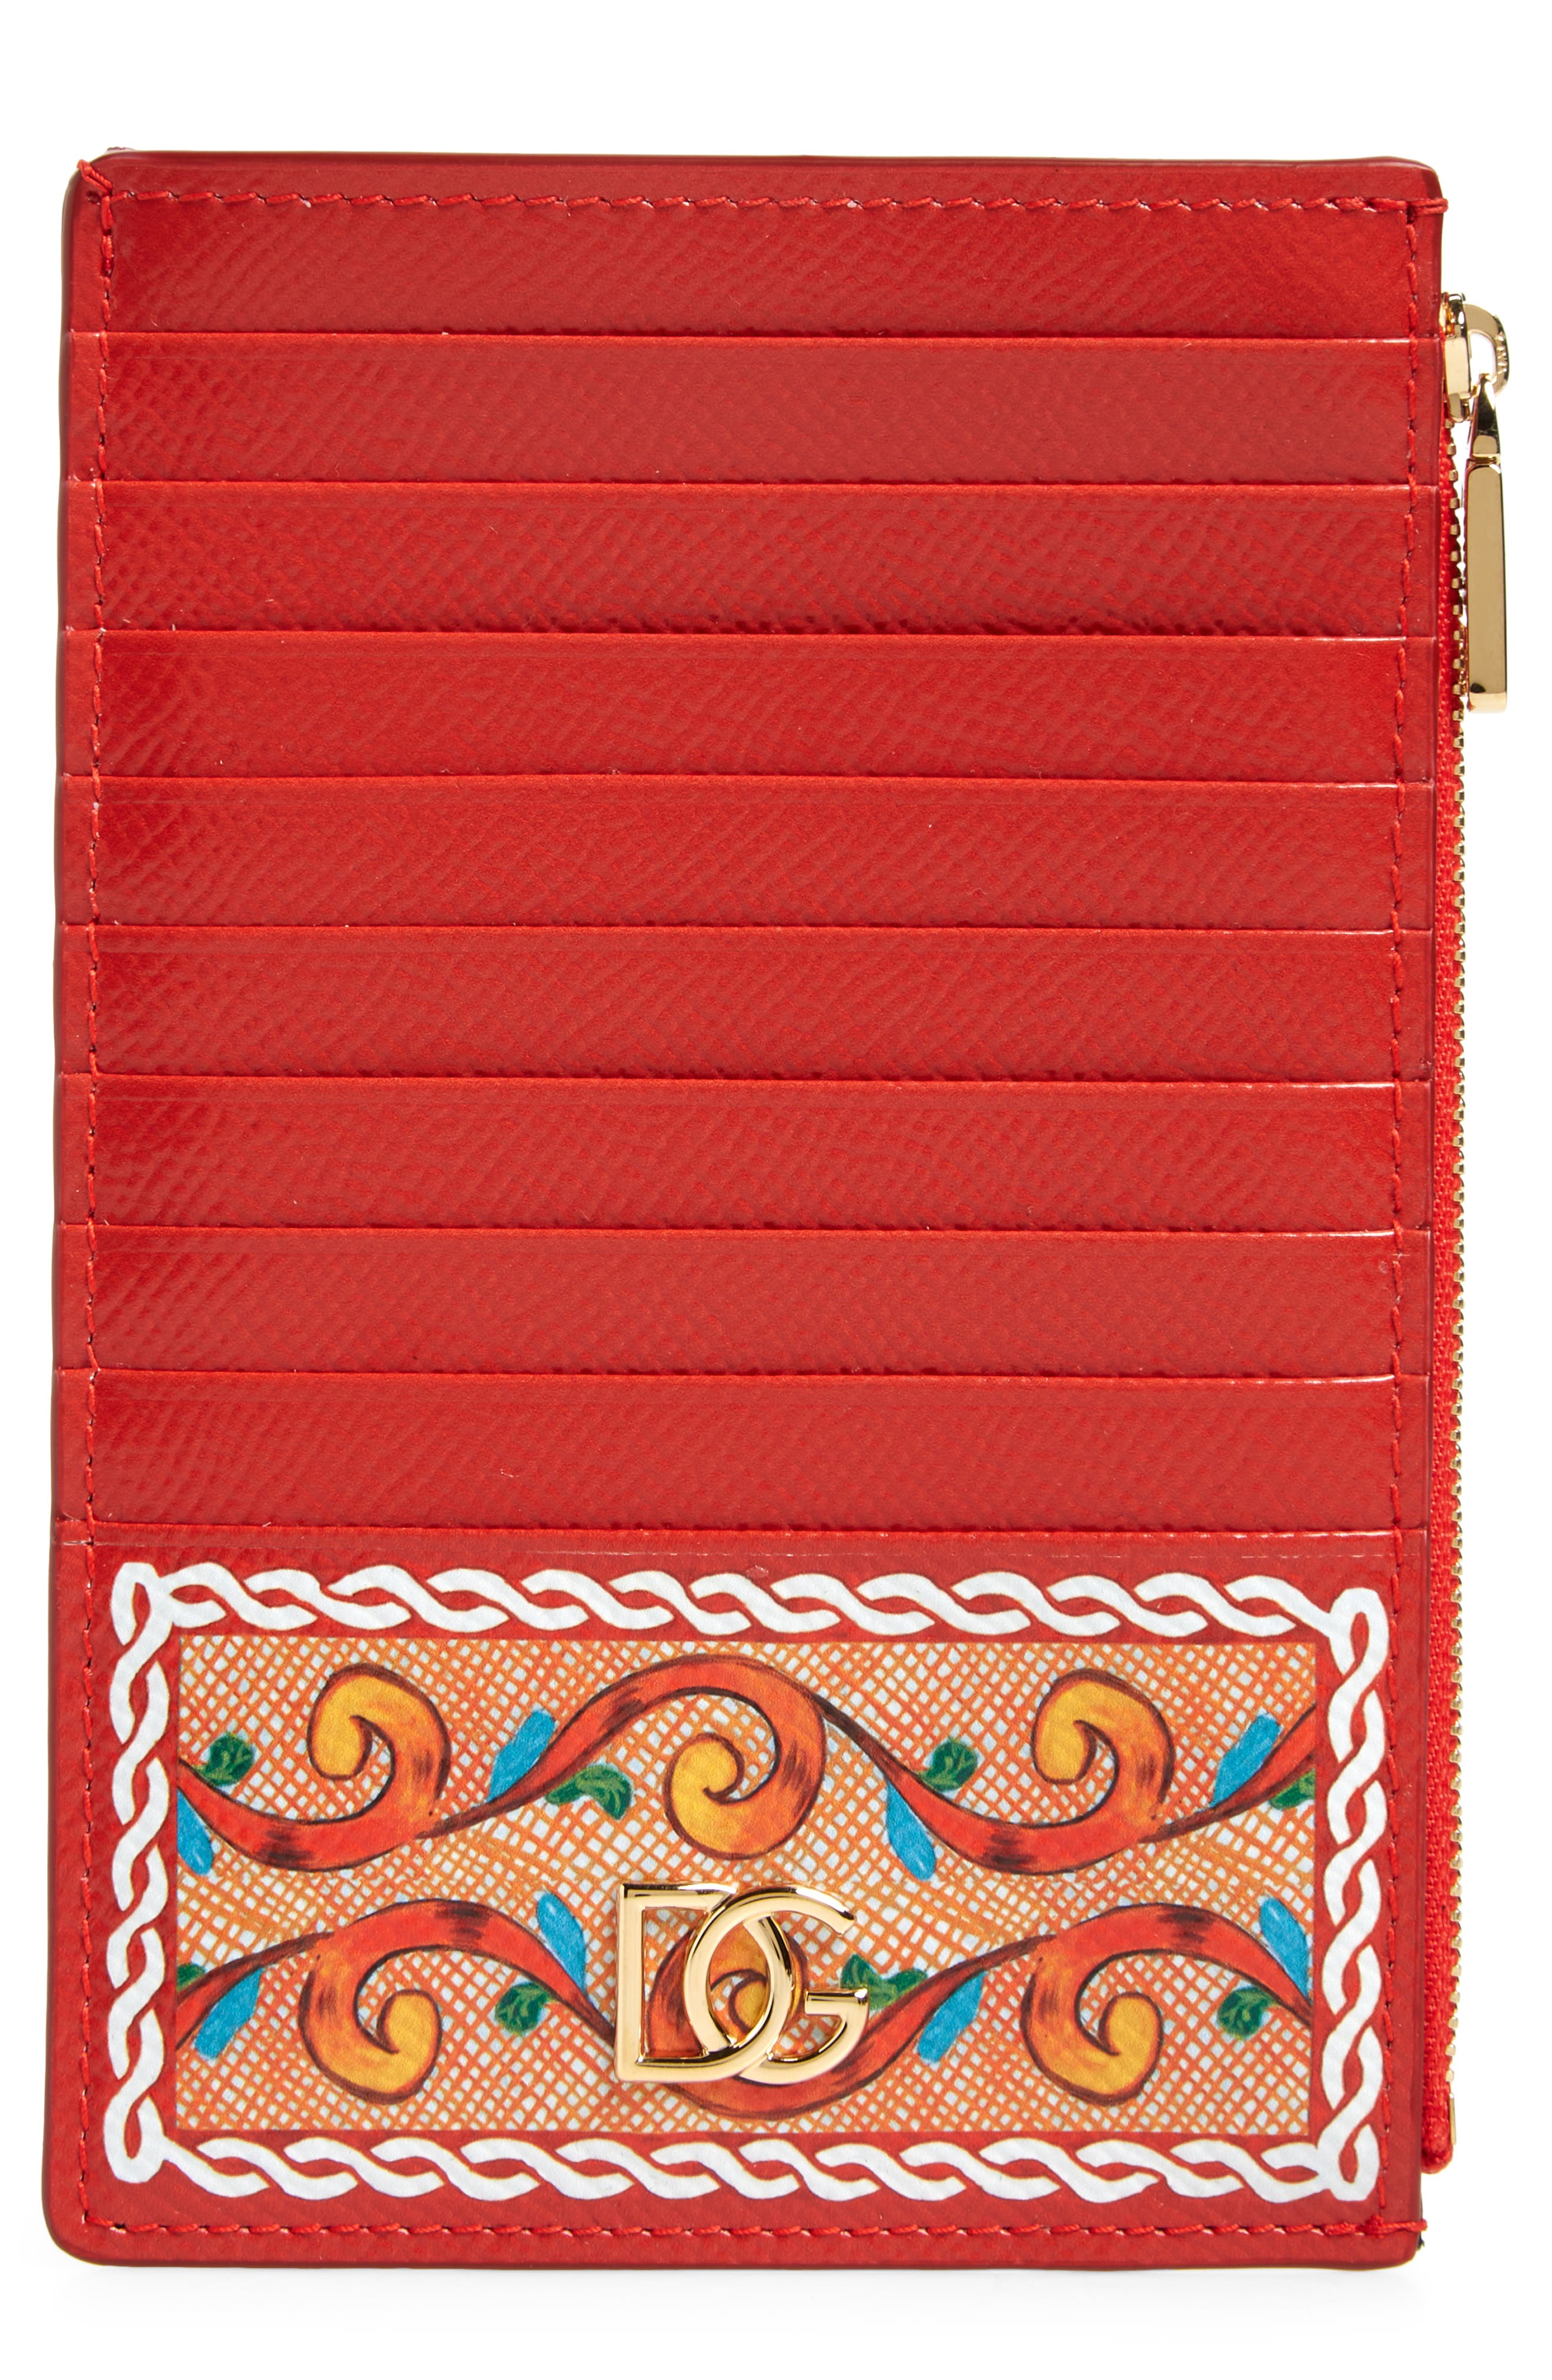 Dolce & Gabbana Large Carretto Print Leather Card Holder in Frigo 11 F.mutlicolo at Nordstrom